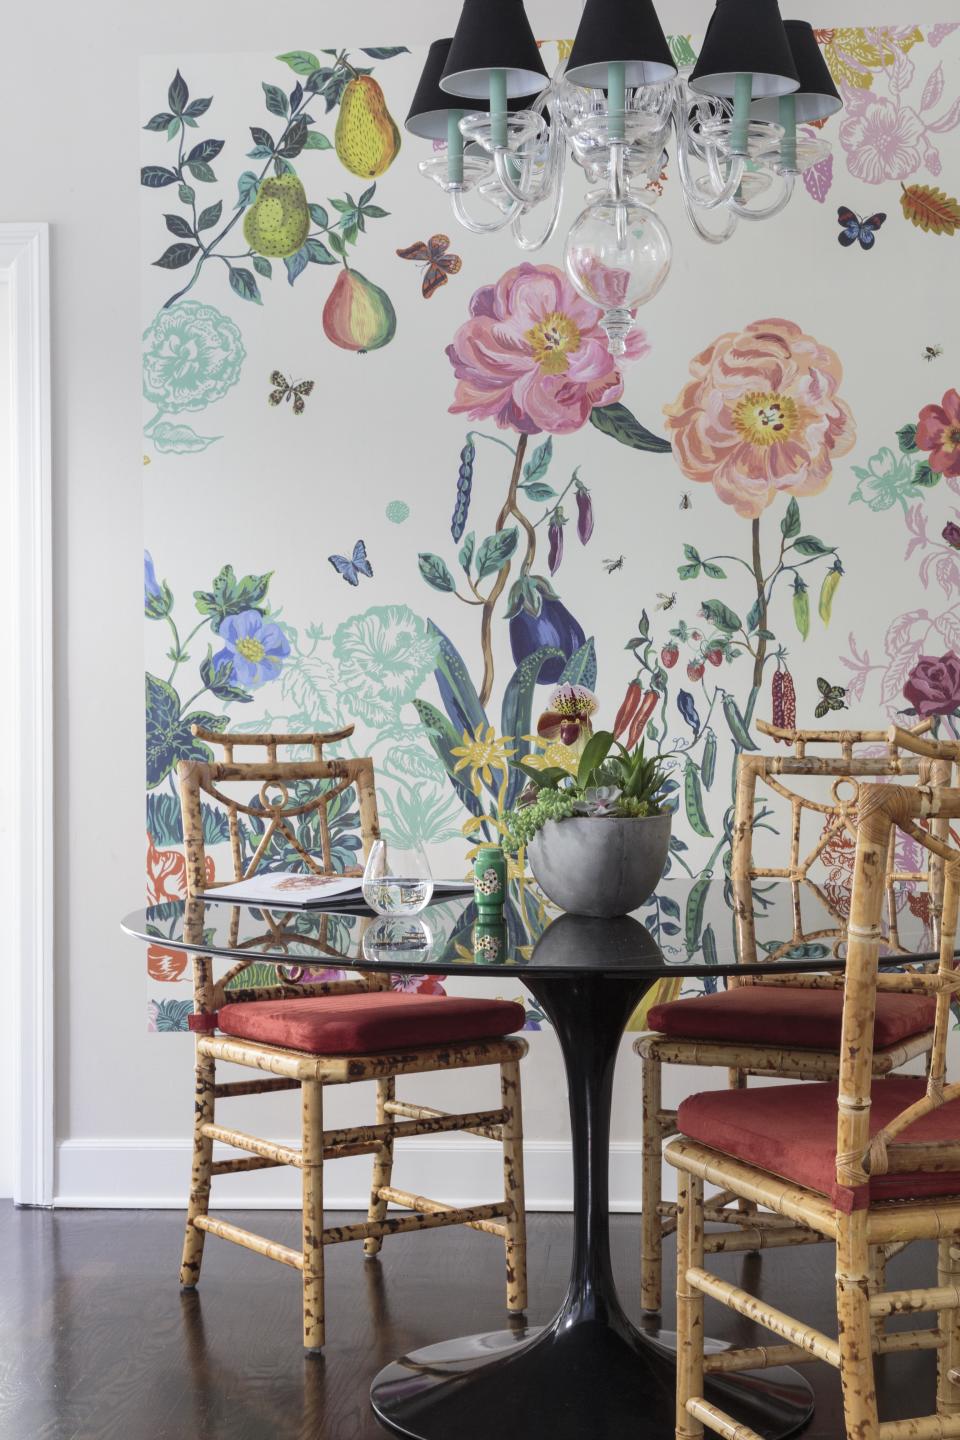 9. Add color and vibrancy with a mural